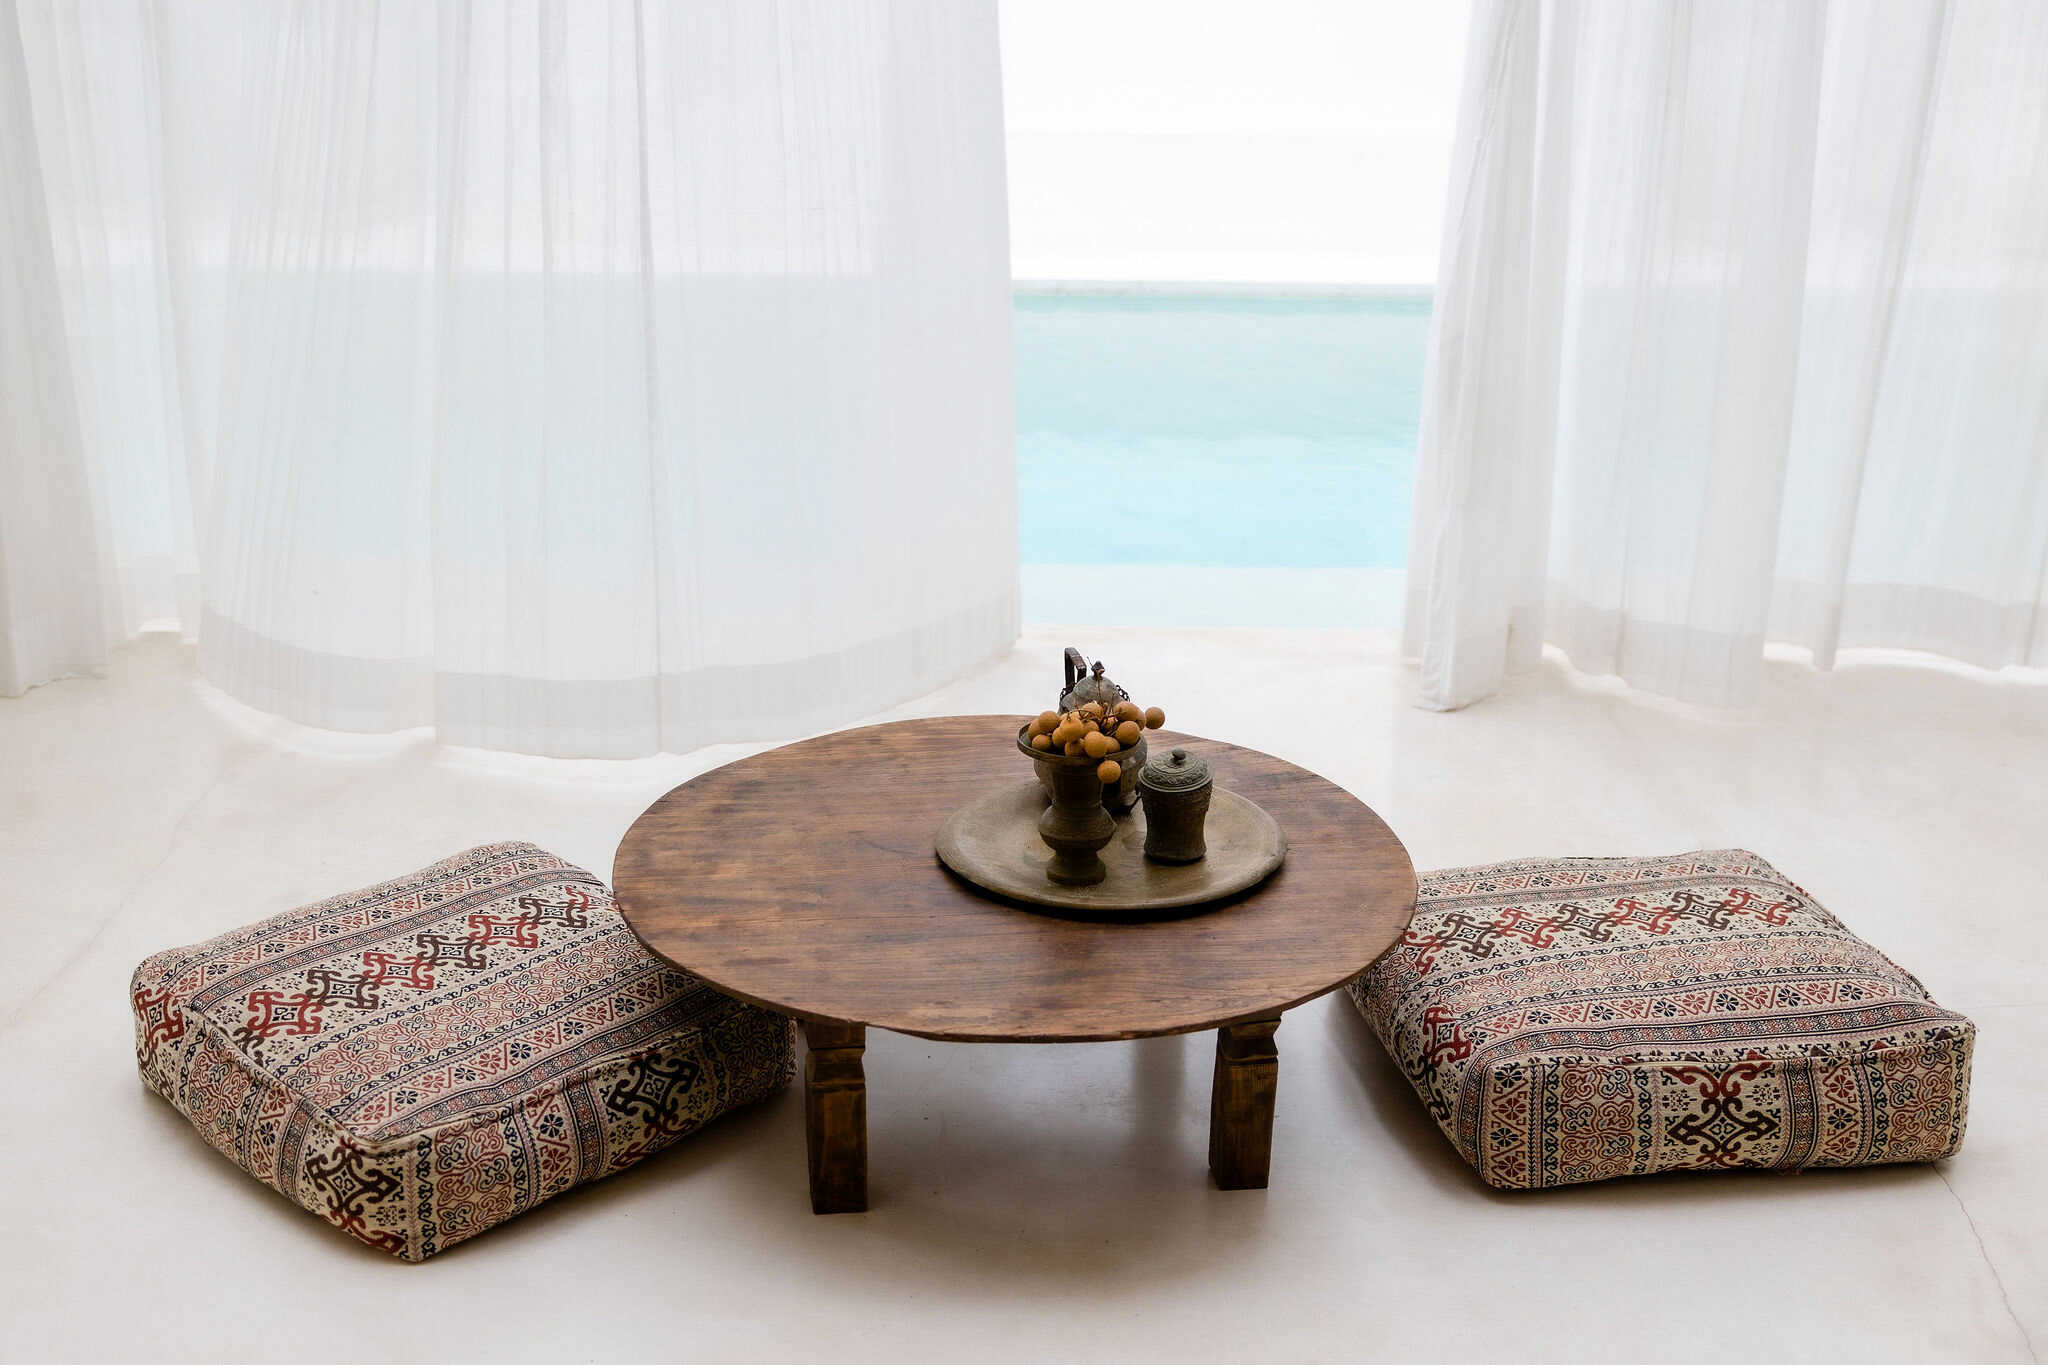 A cozy seaside relaxation spot embracing a holistic path, with a wooden table, patterned floor cushions, and sheer curtains overlooking a tranquil ocean view.